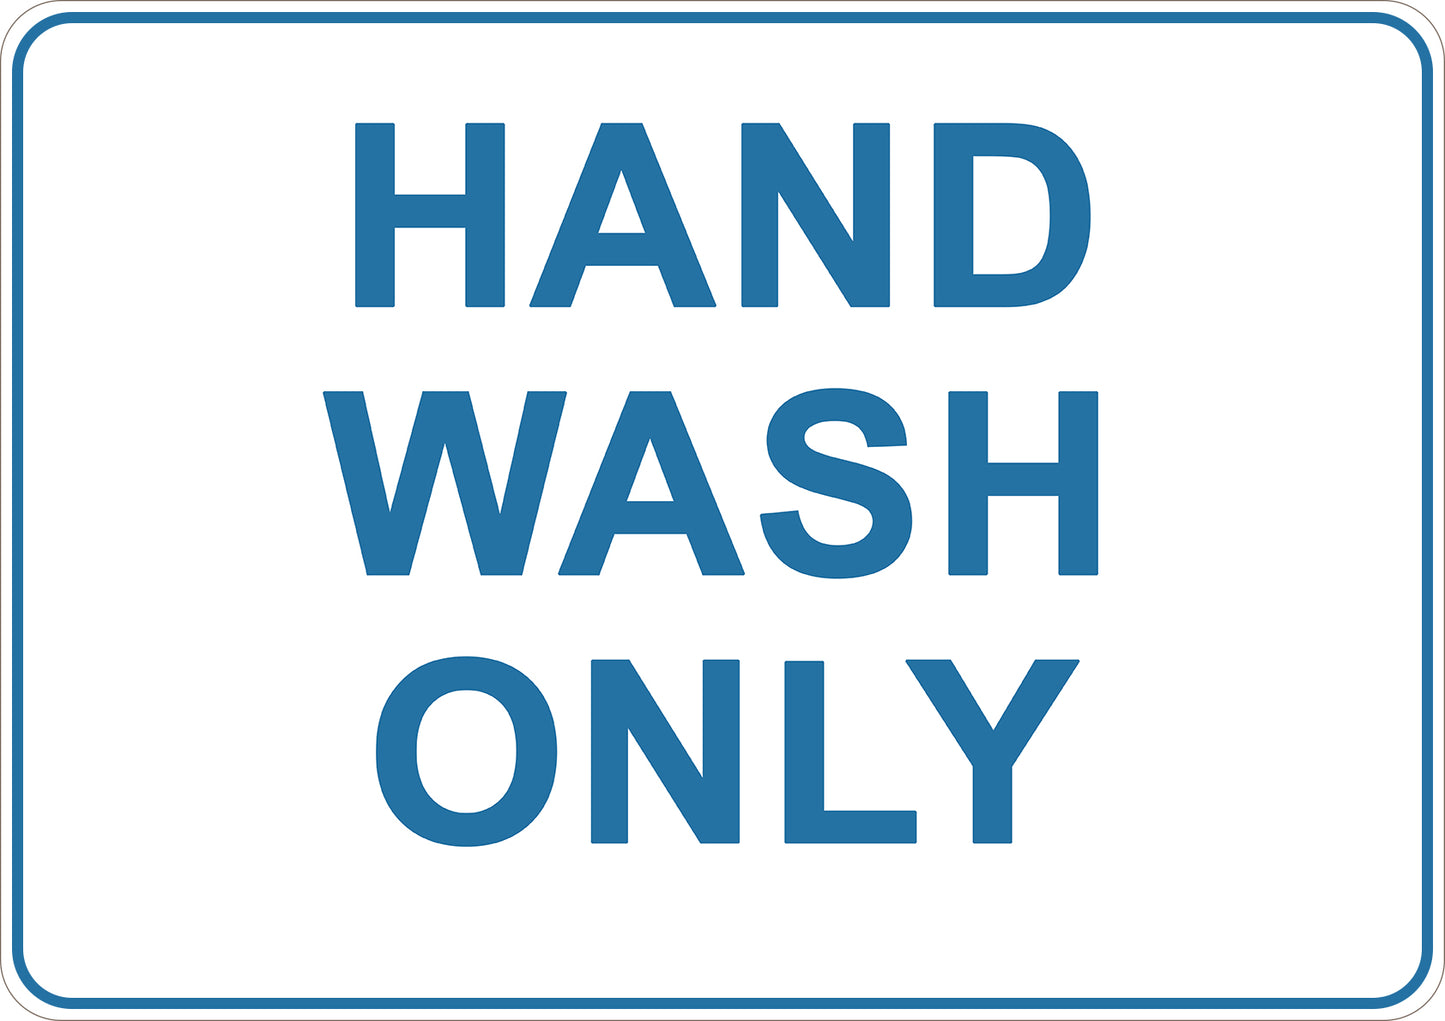 Hand Wash Only Printed Sign